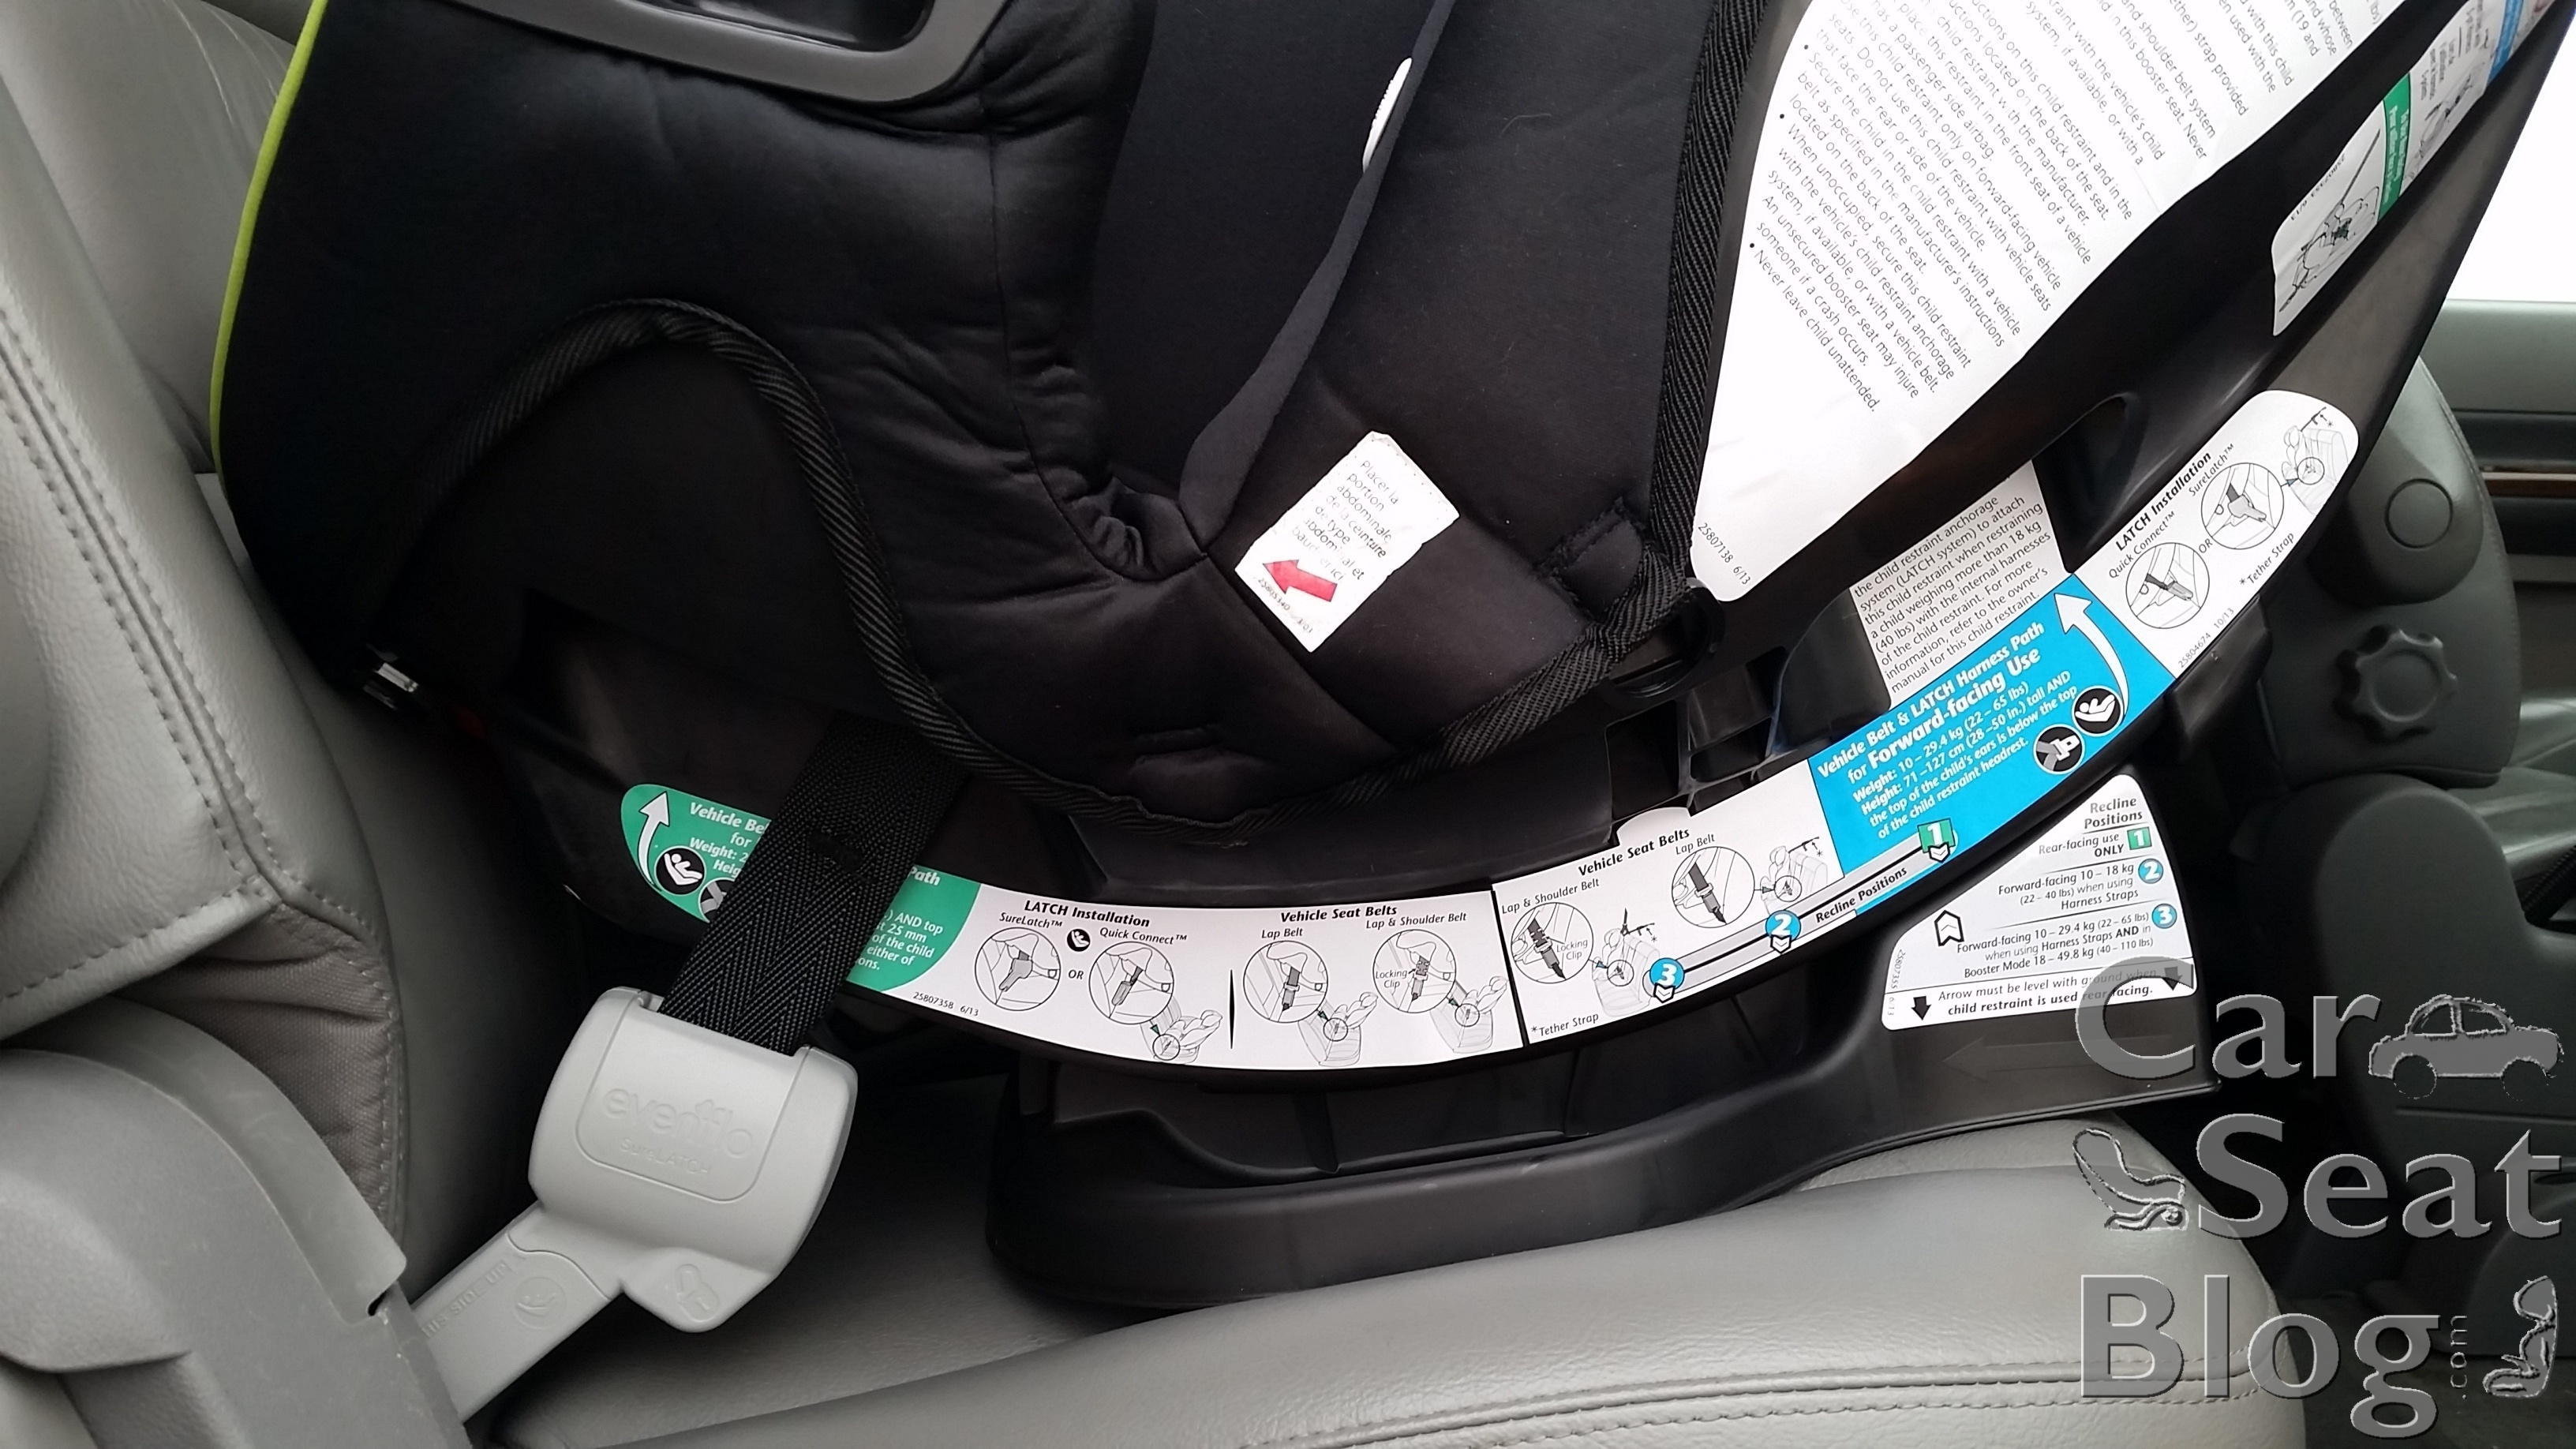 evenflo car seat rear facing weight limit